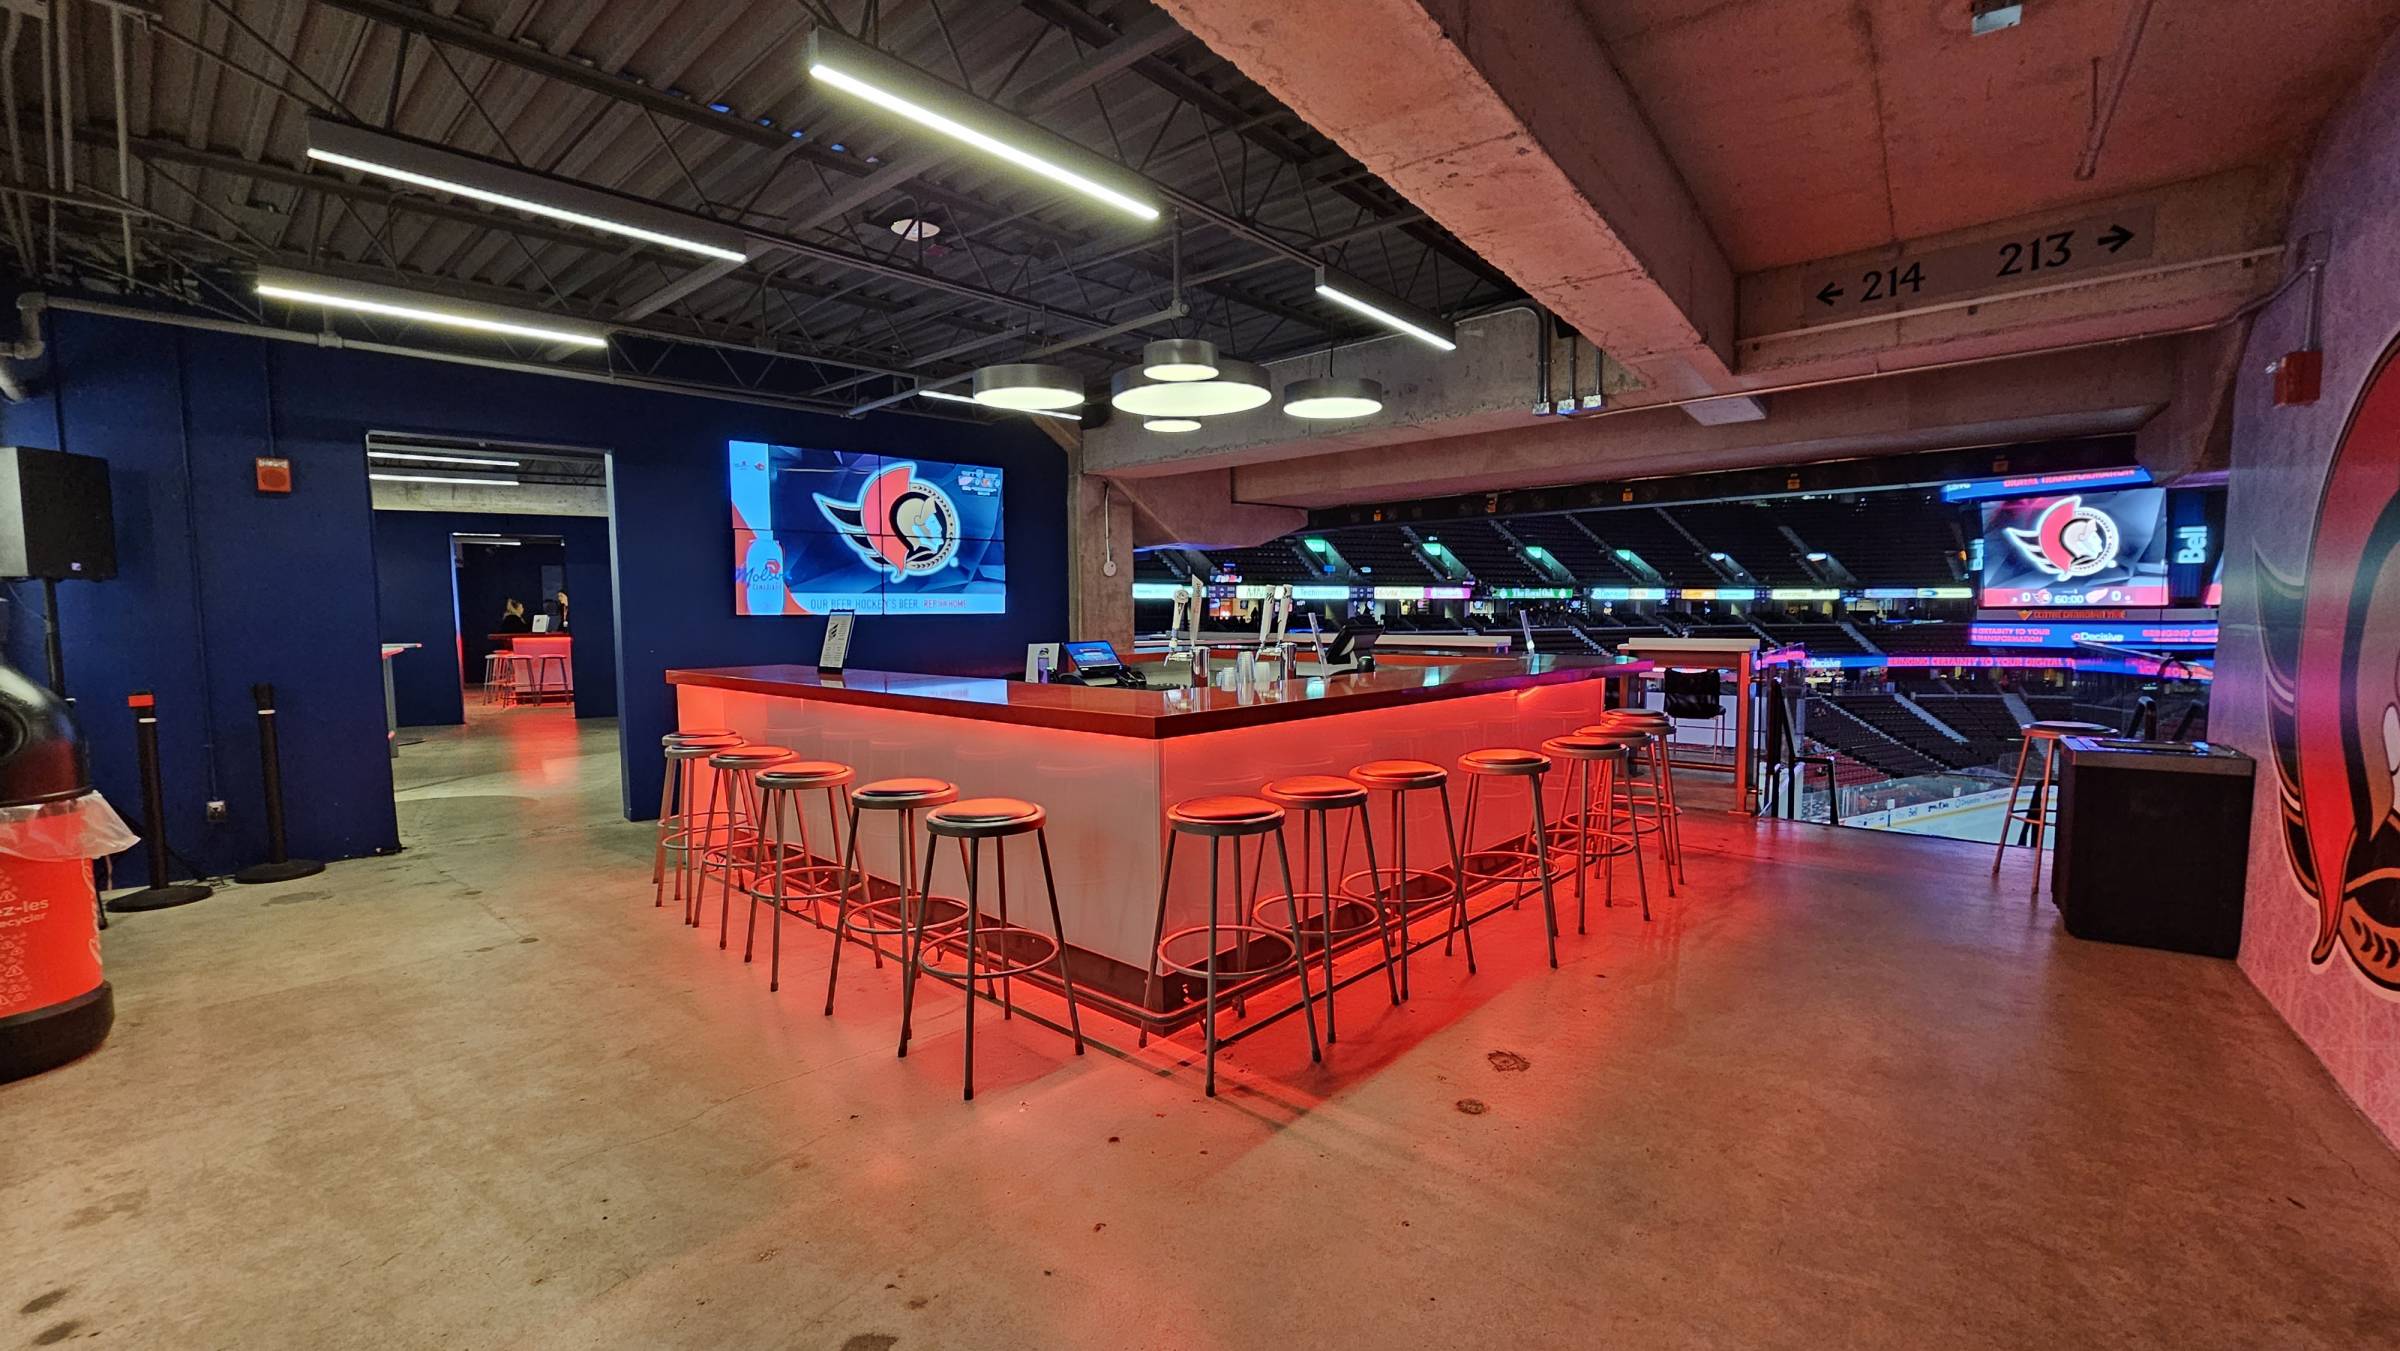 Inside the Molson Canadian Fan Deck at the Canadian Tire Centre